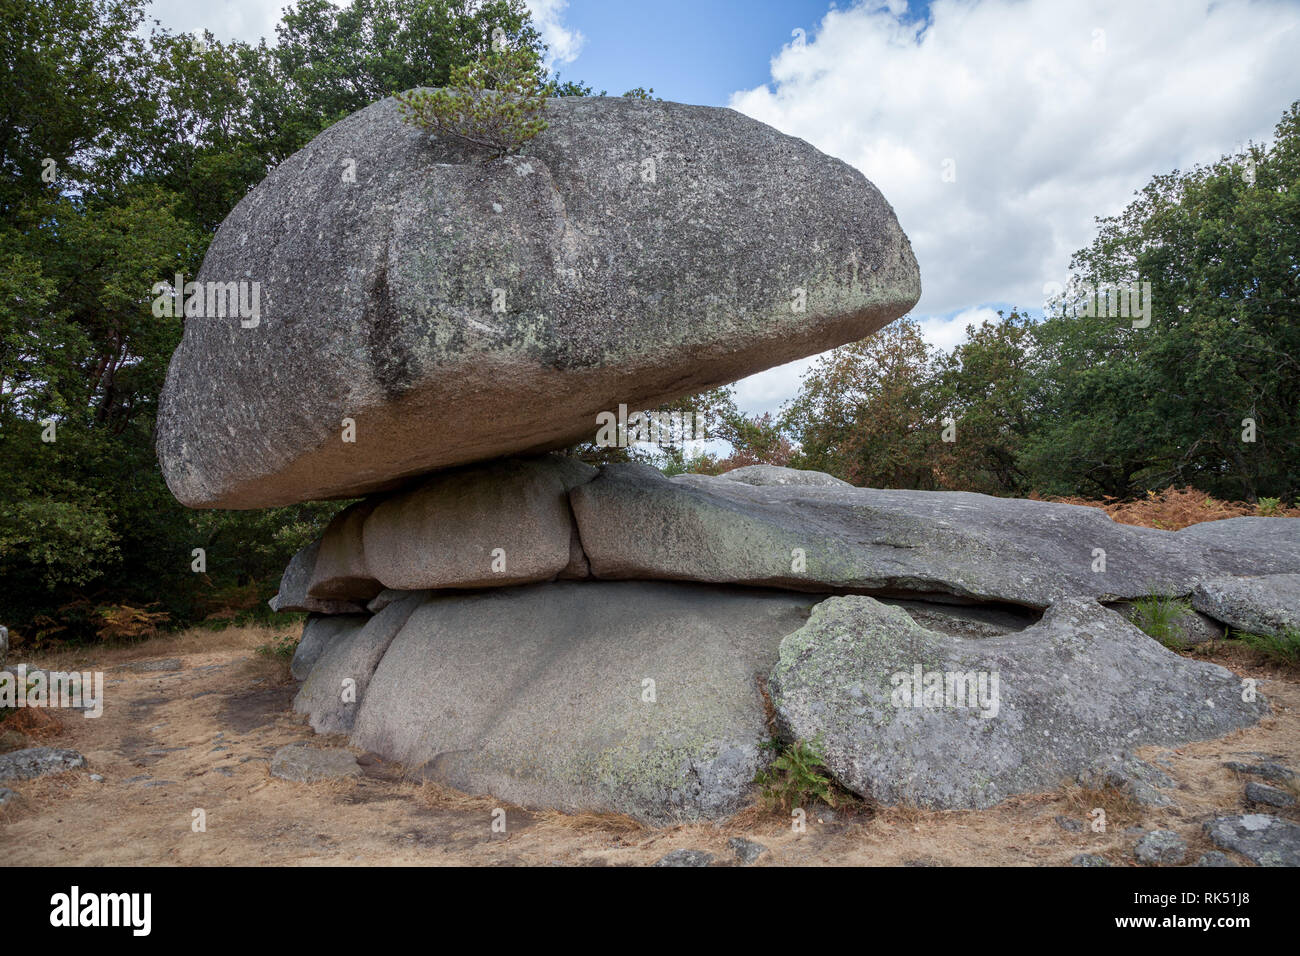 Large rocks in a forest in the south of Sweden Stock Photo